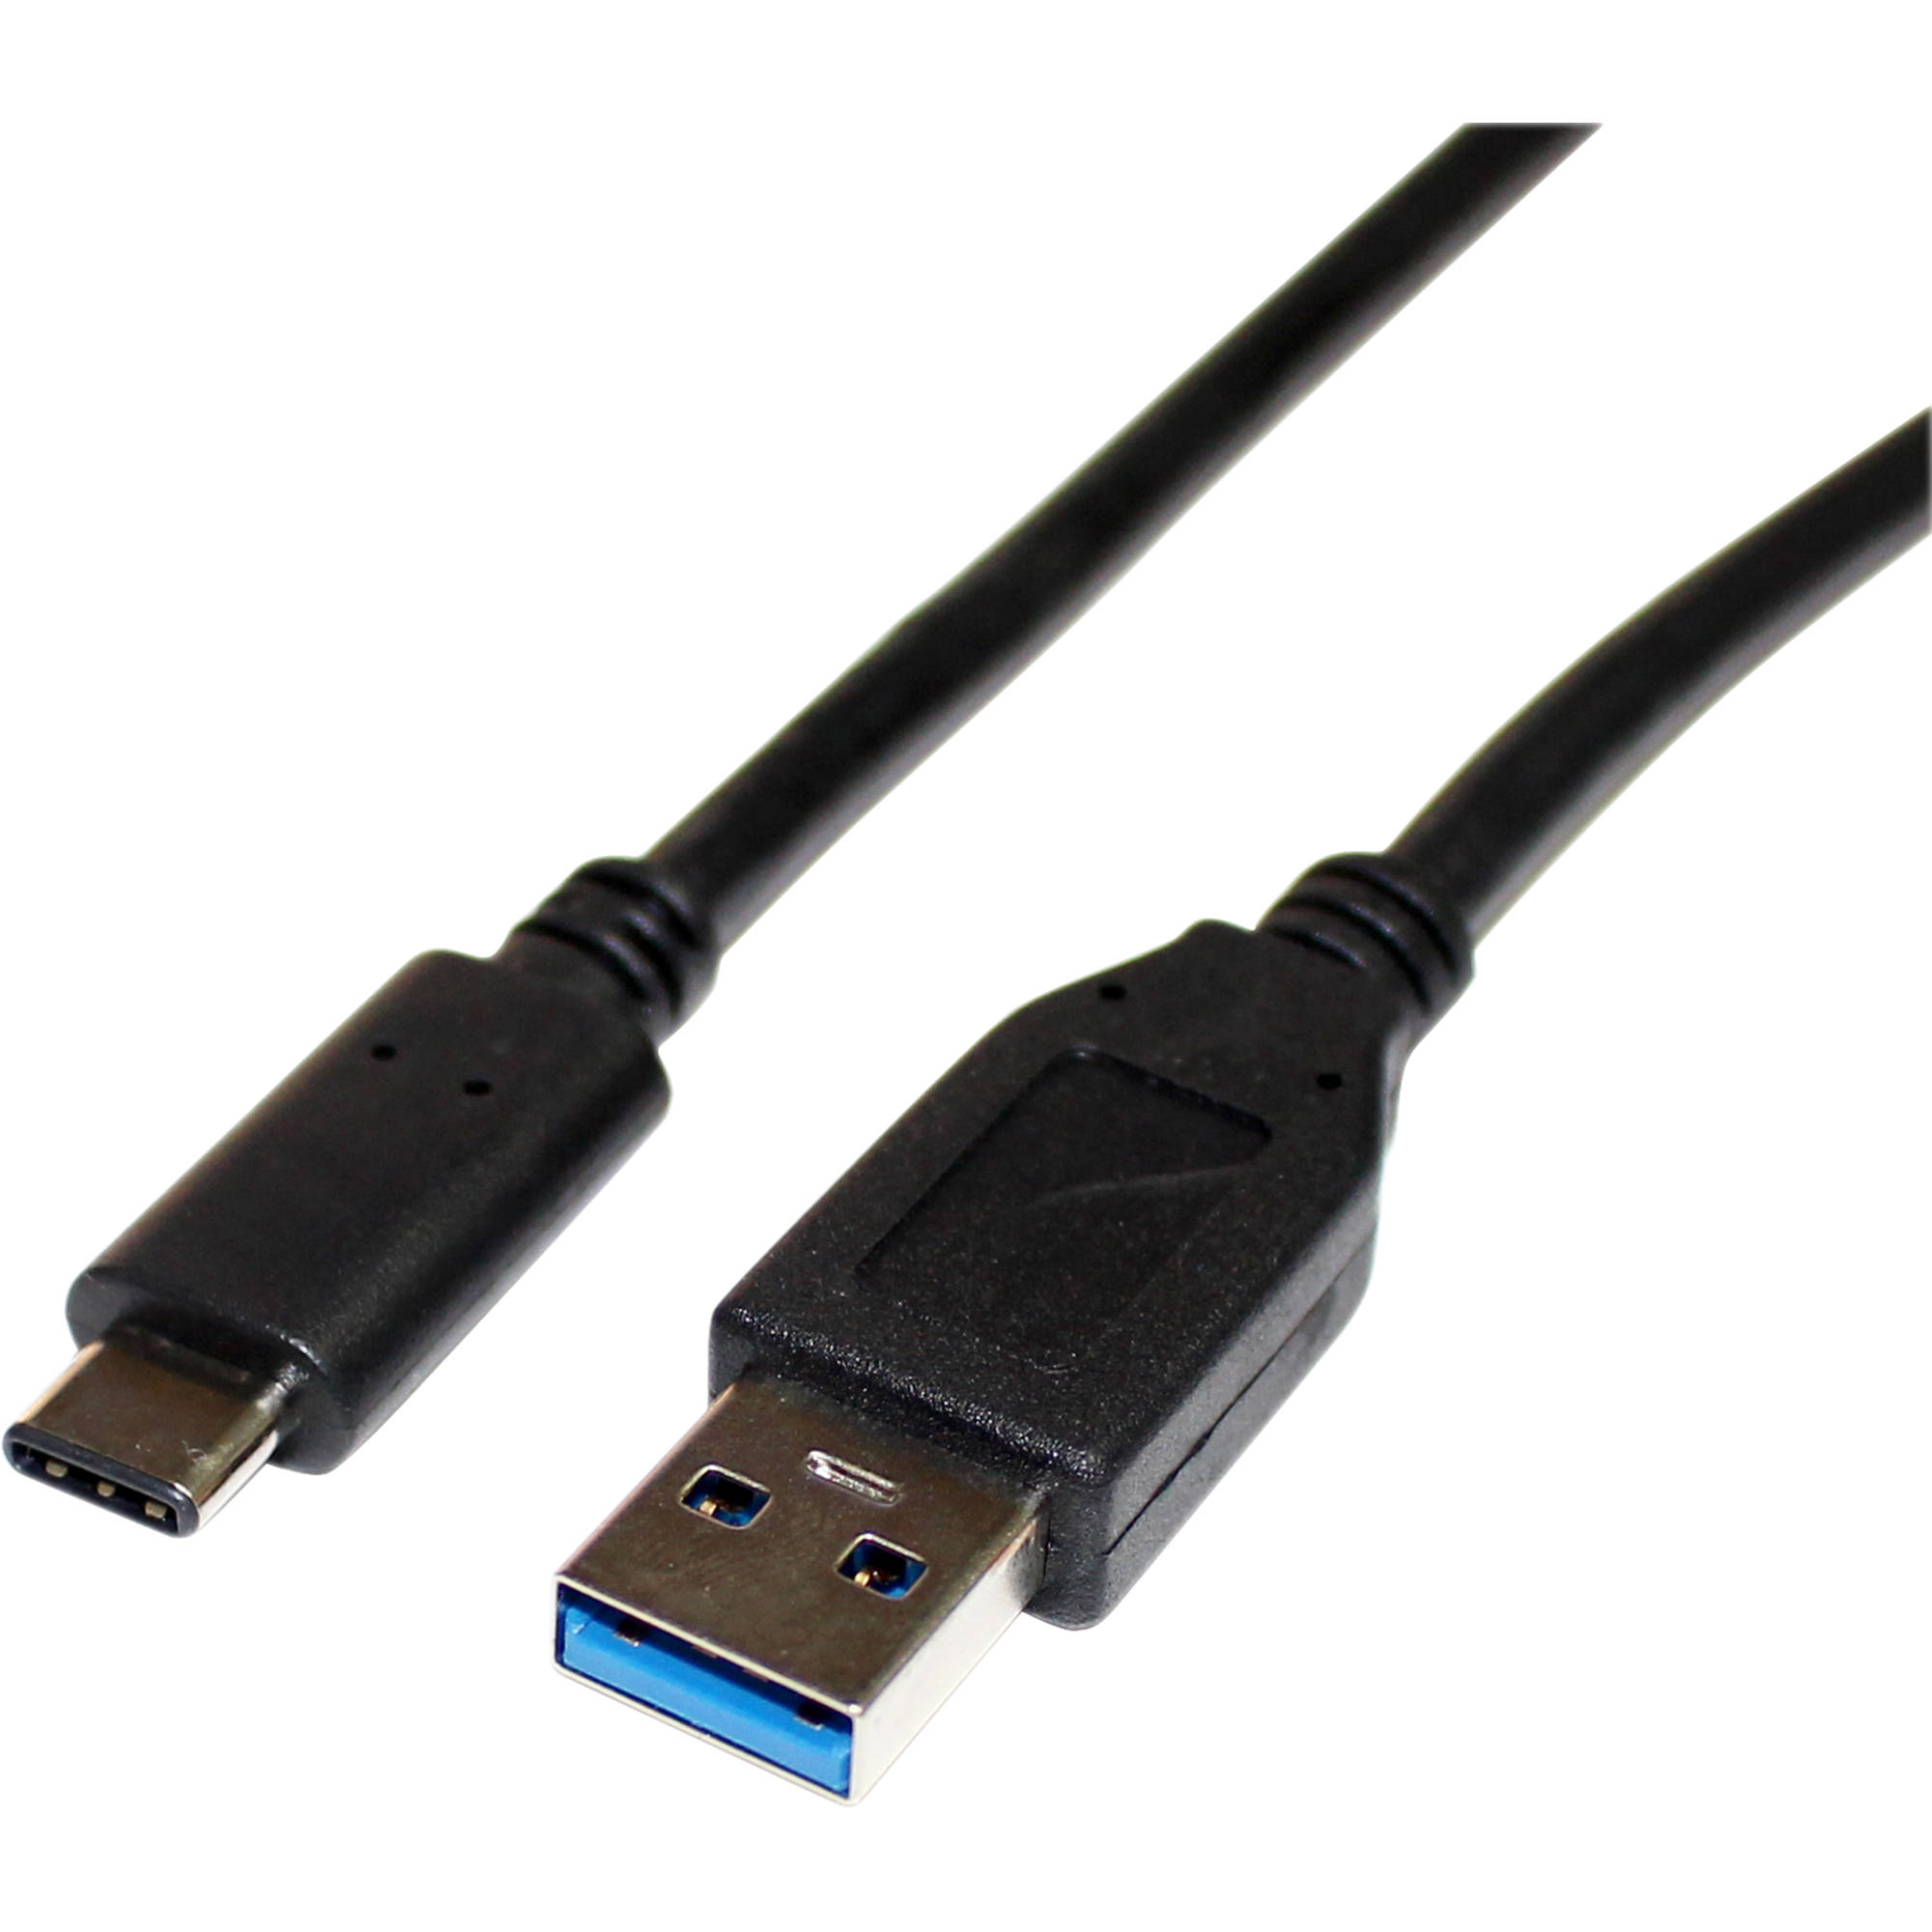 Tera Grand USB 3.1 Gen 2 Type-C to Type-A Charge and Sync Cable (3', Black)